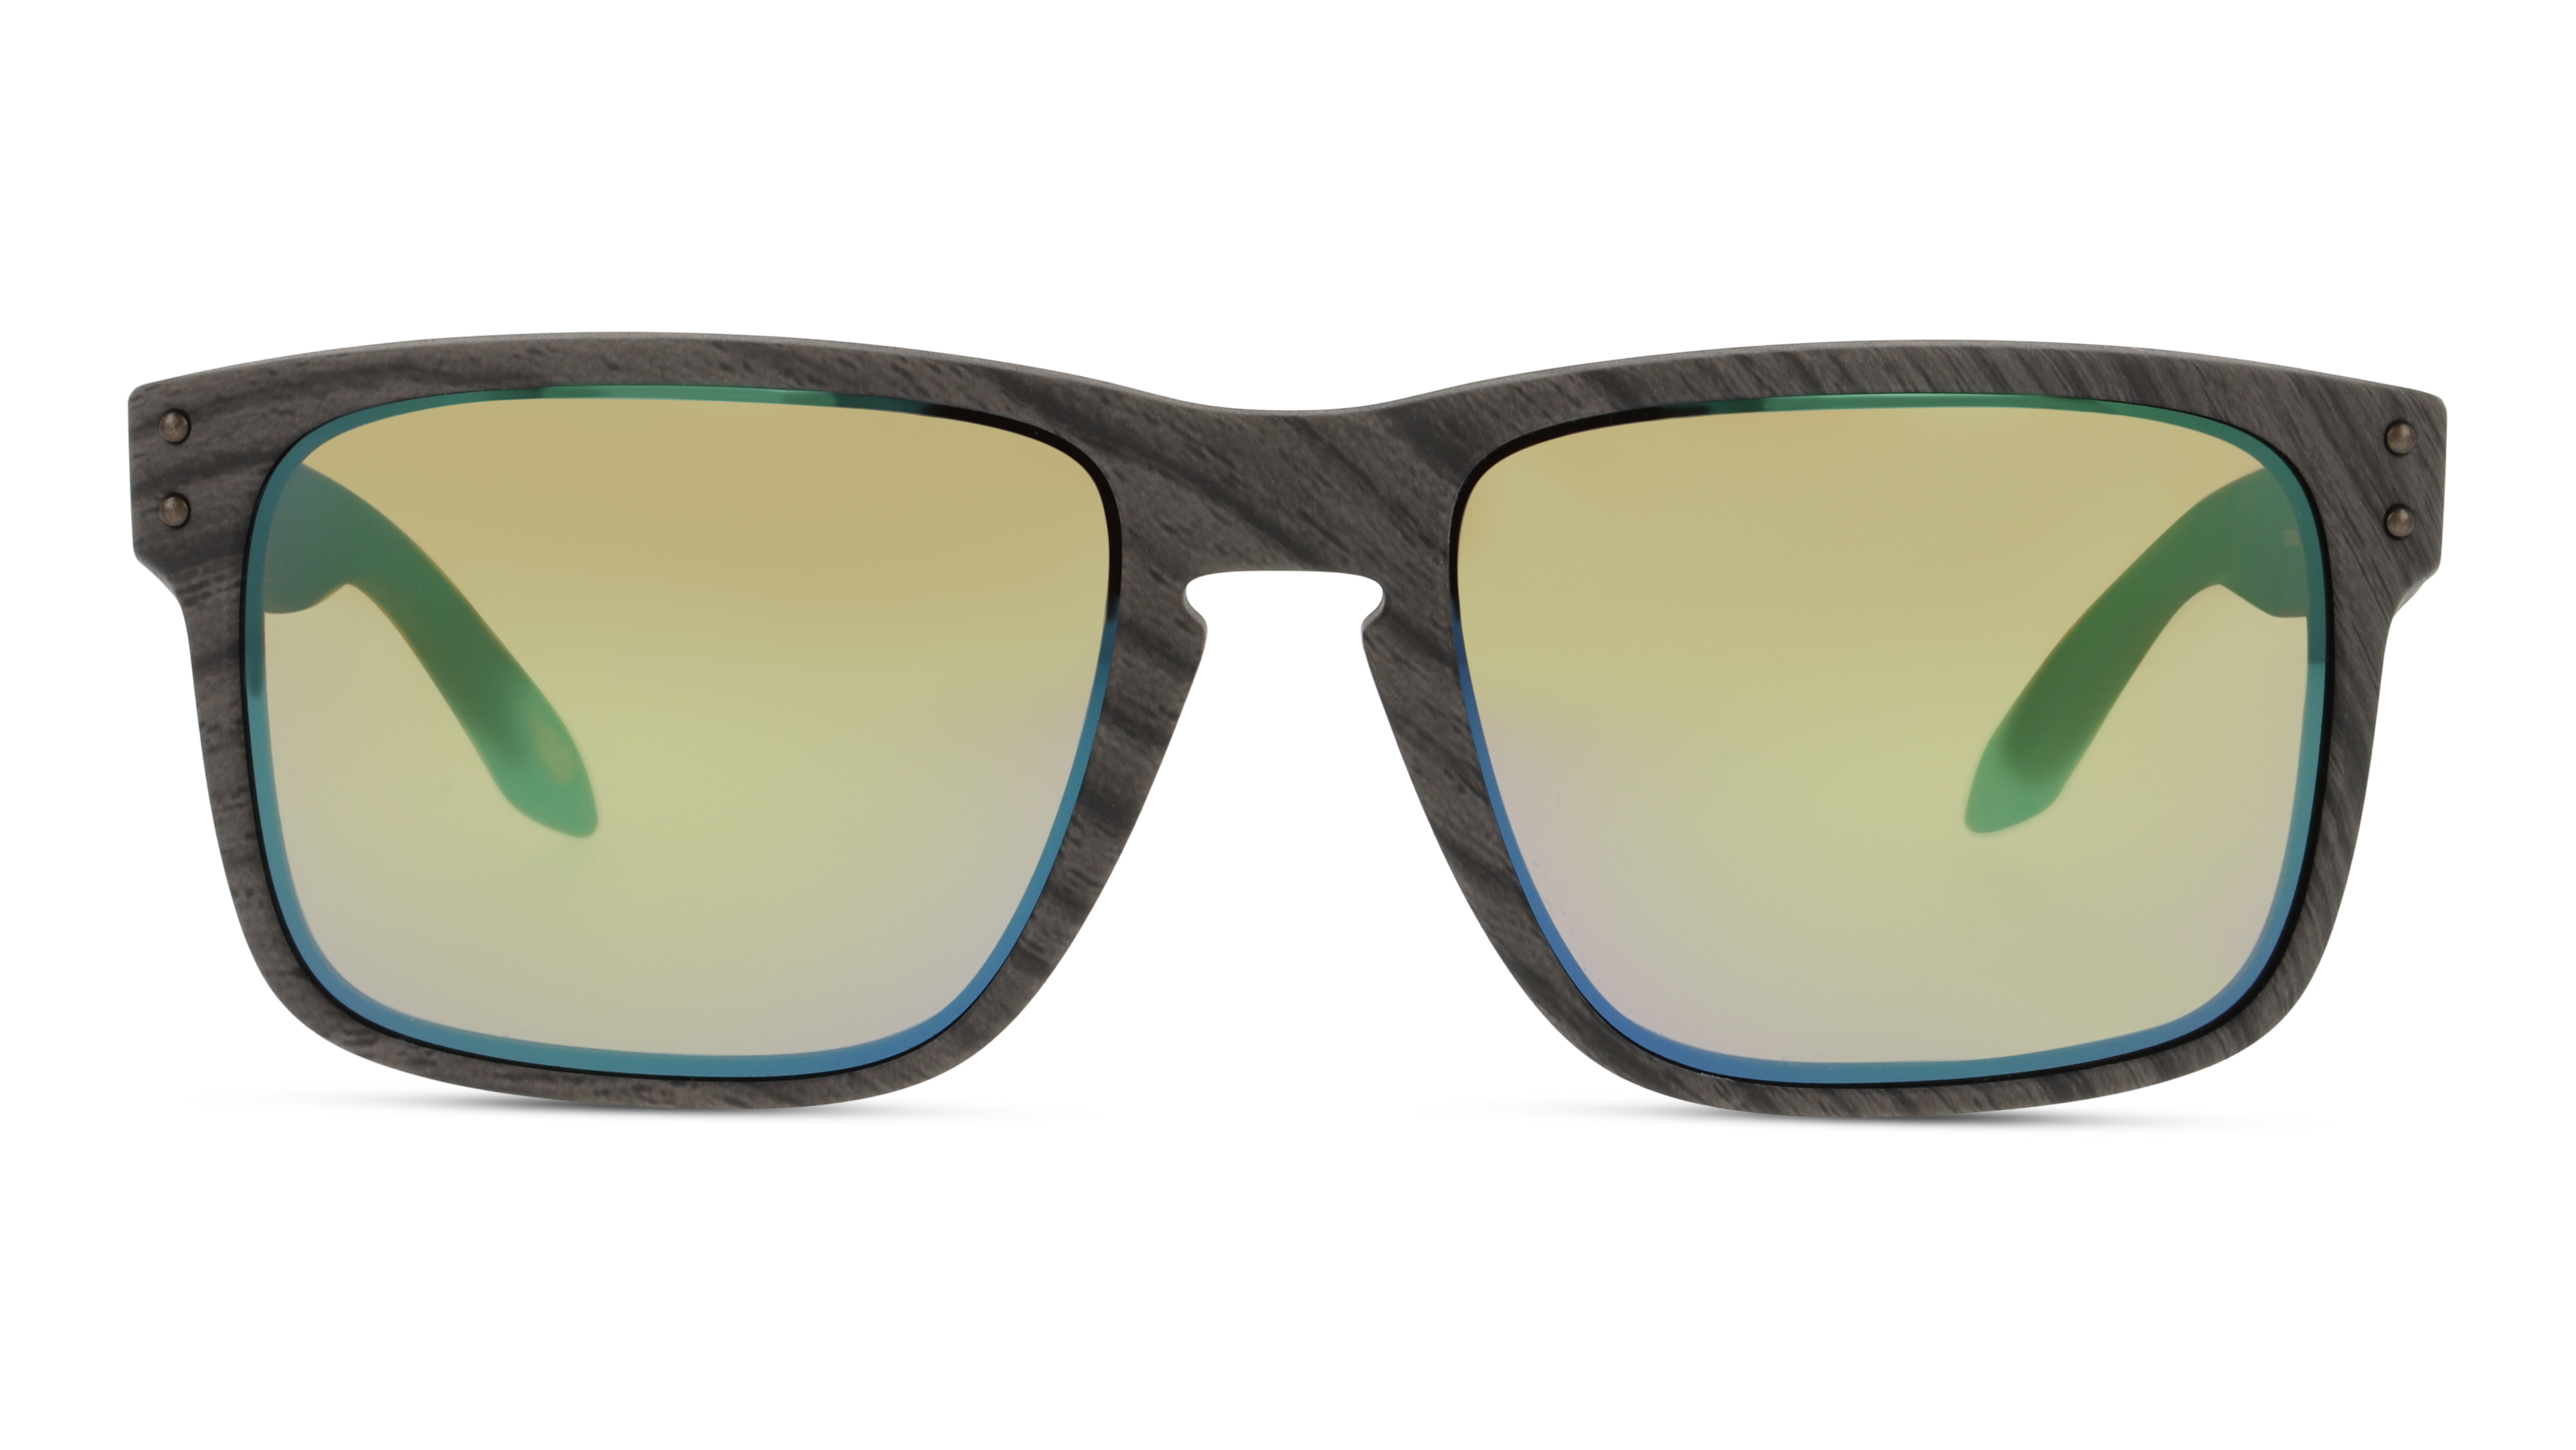 [products.image.front] Oakley Holbrook 0OO9102 9102J8